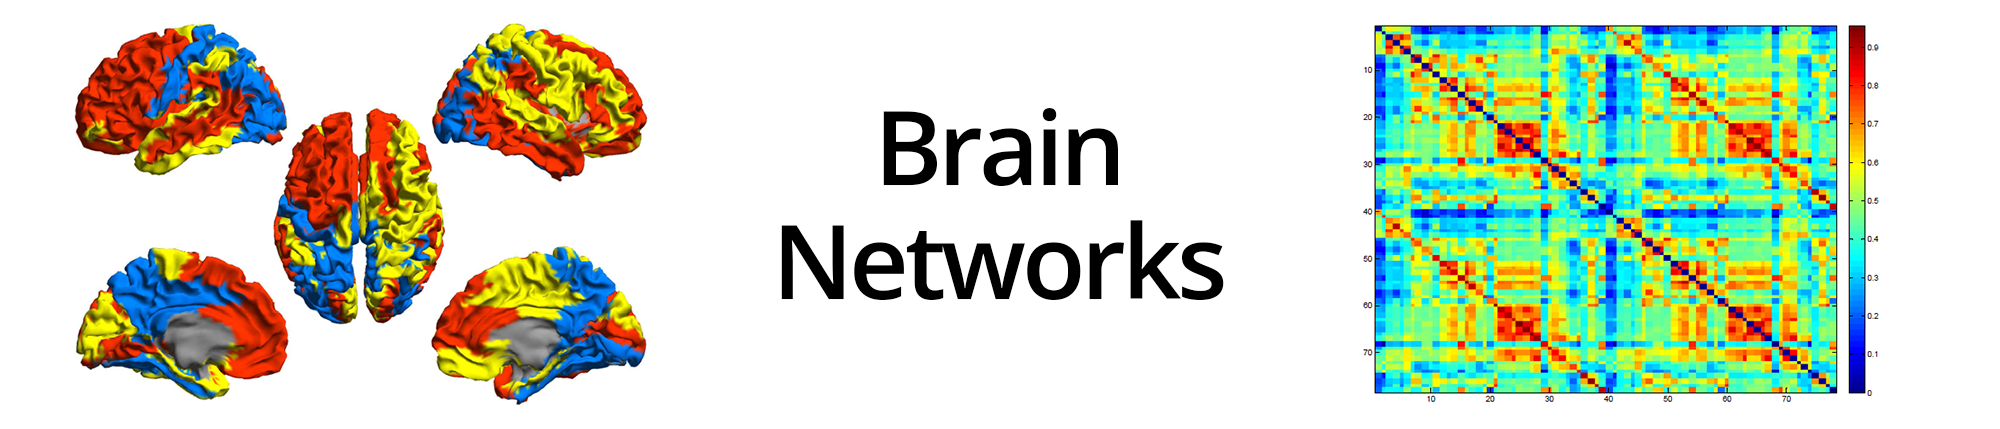 BrainNetworks1.png